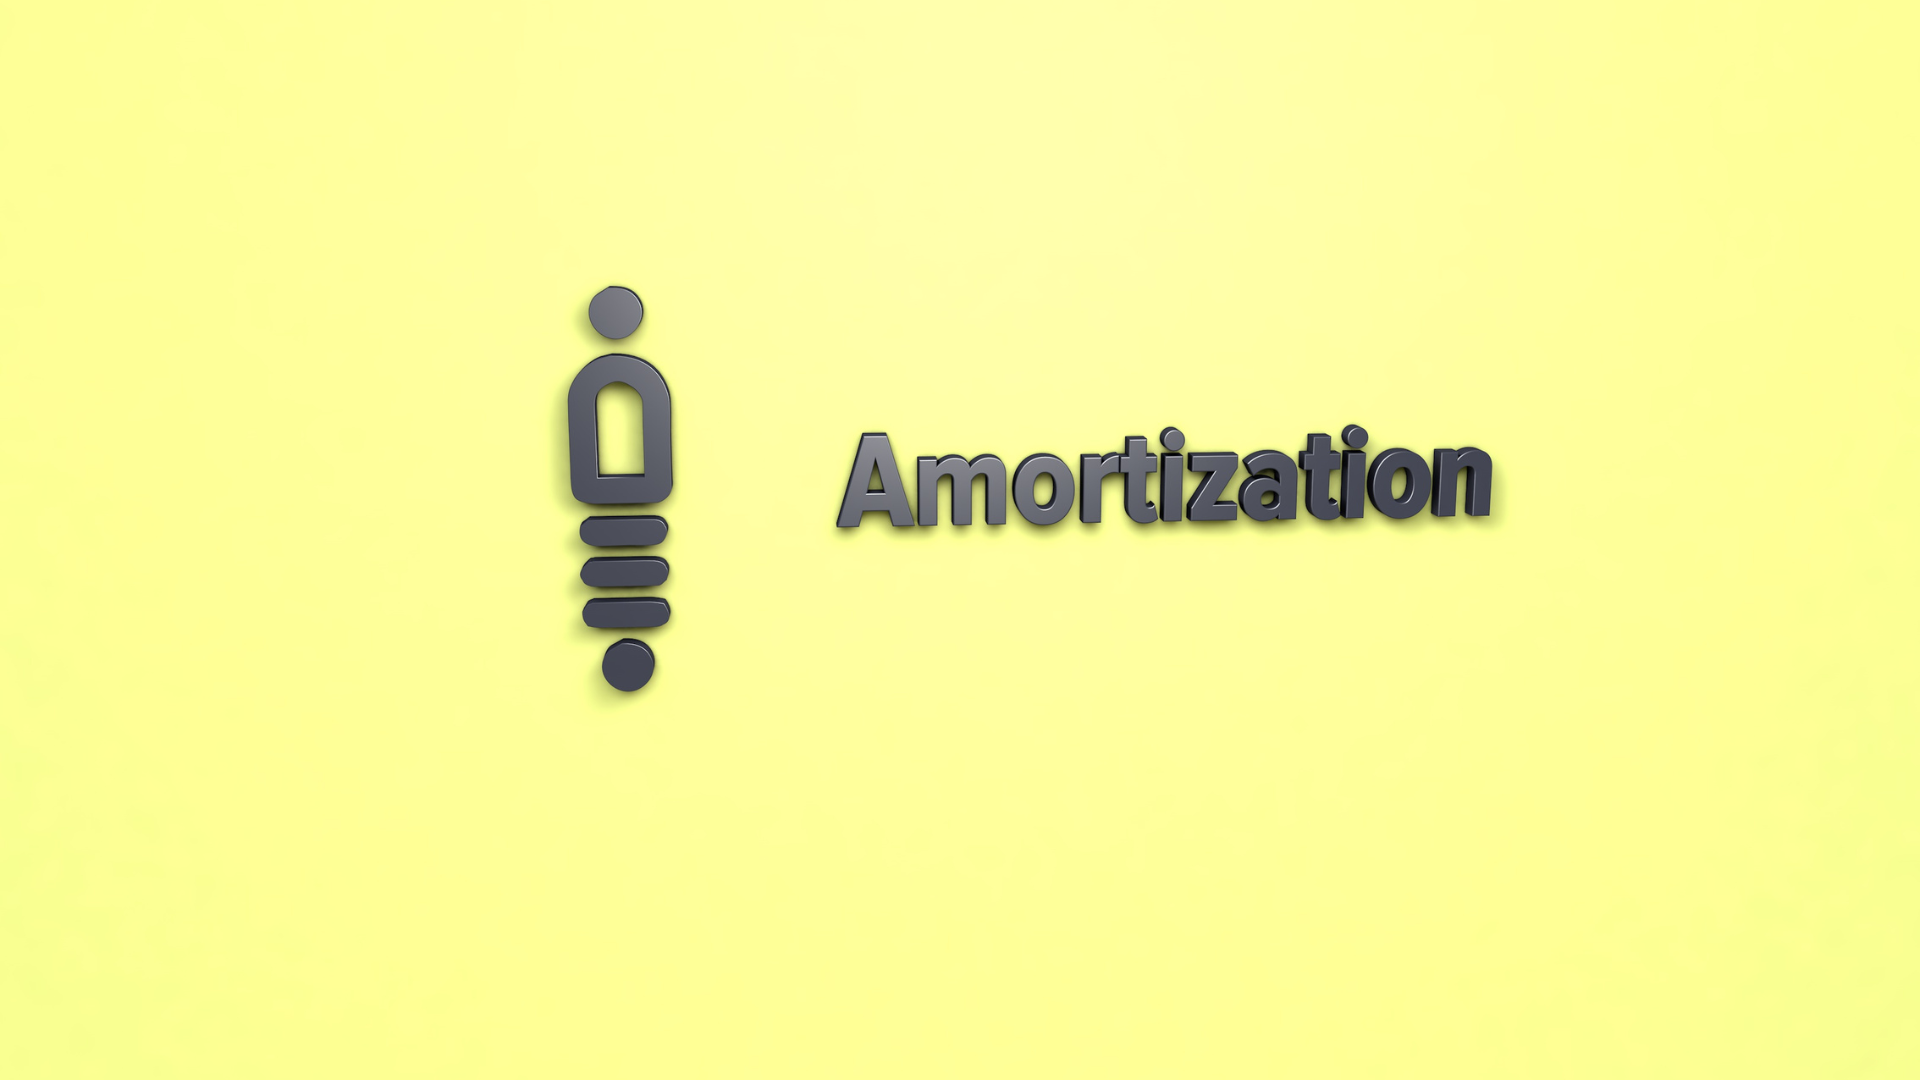 What Does Amortization Mean?